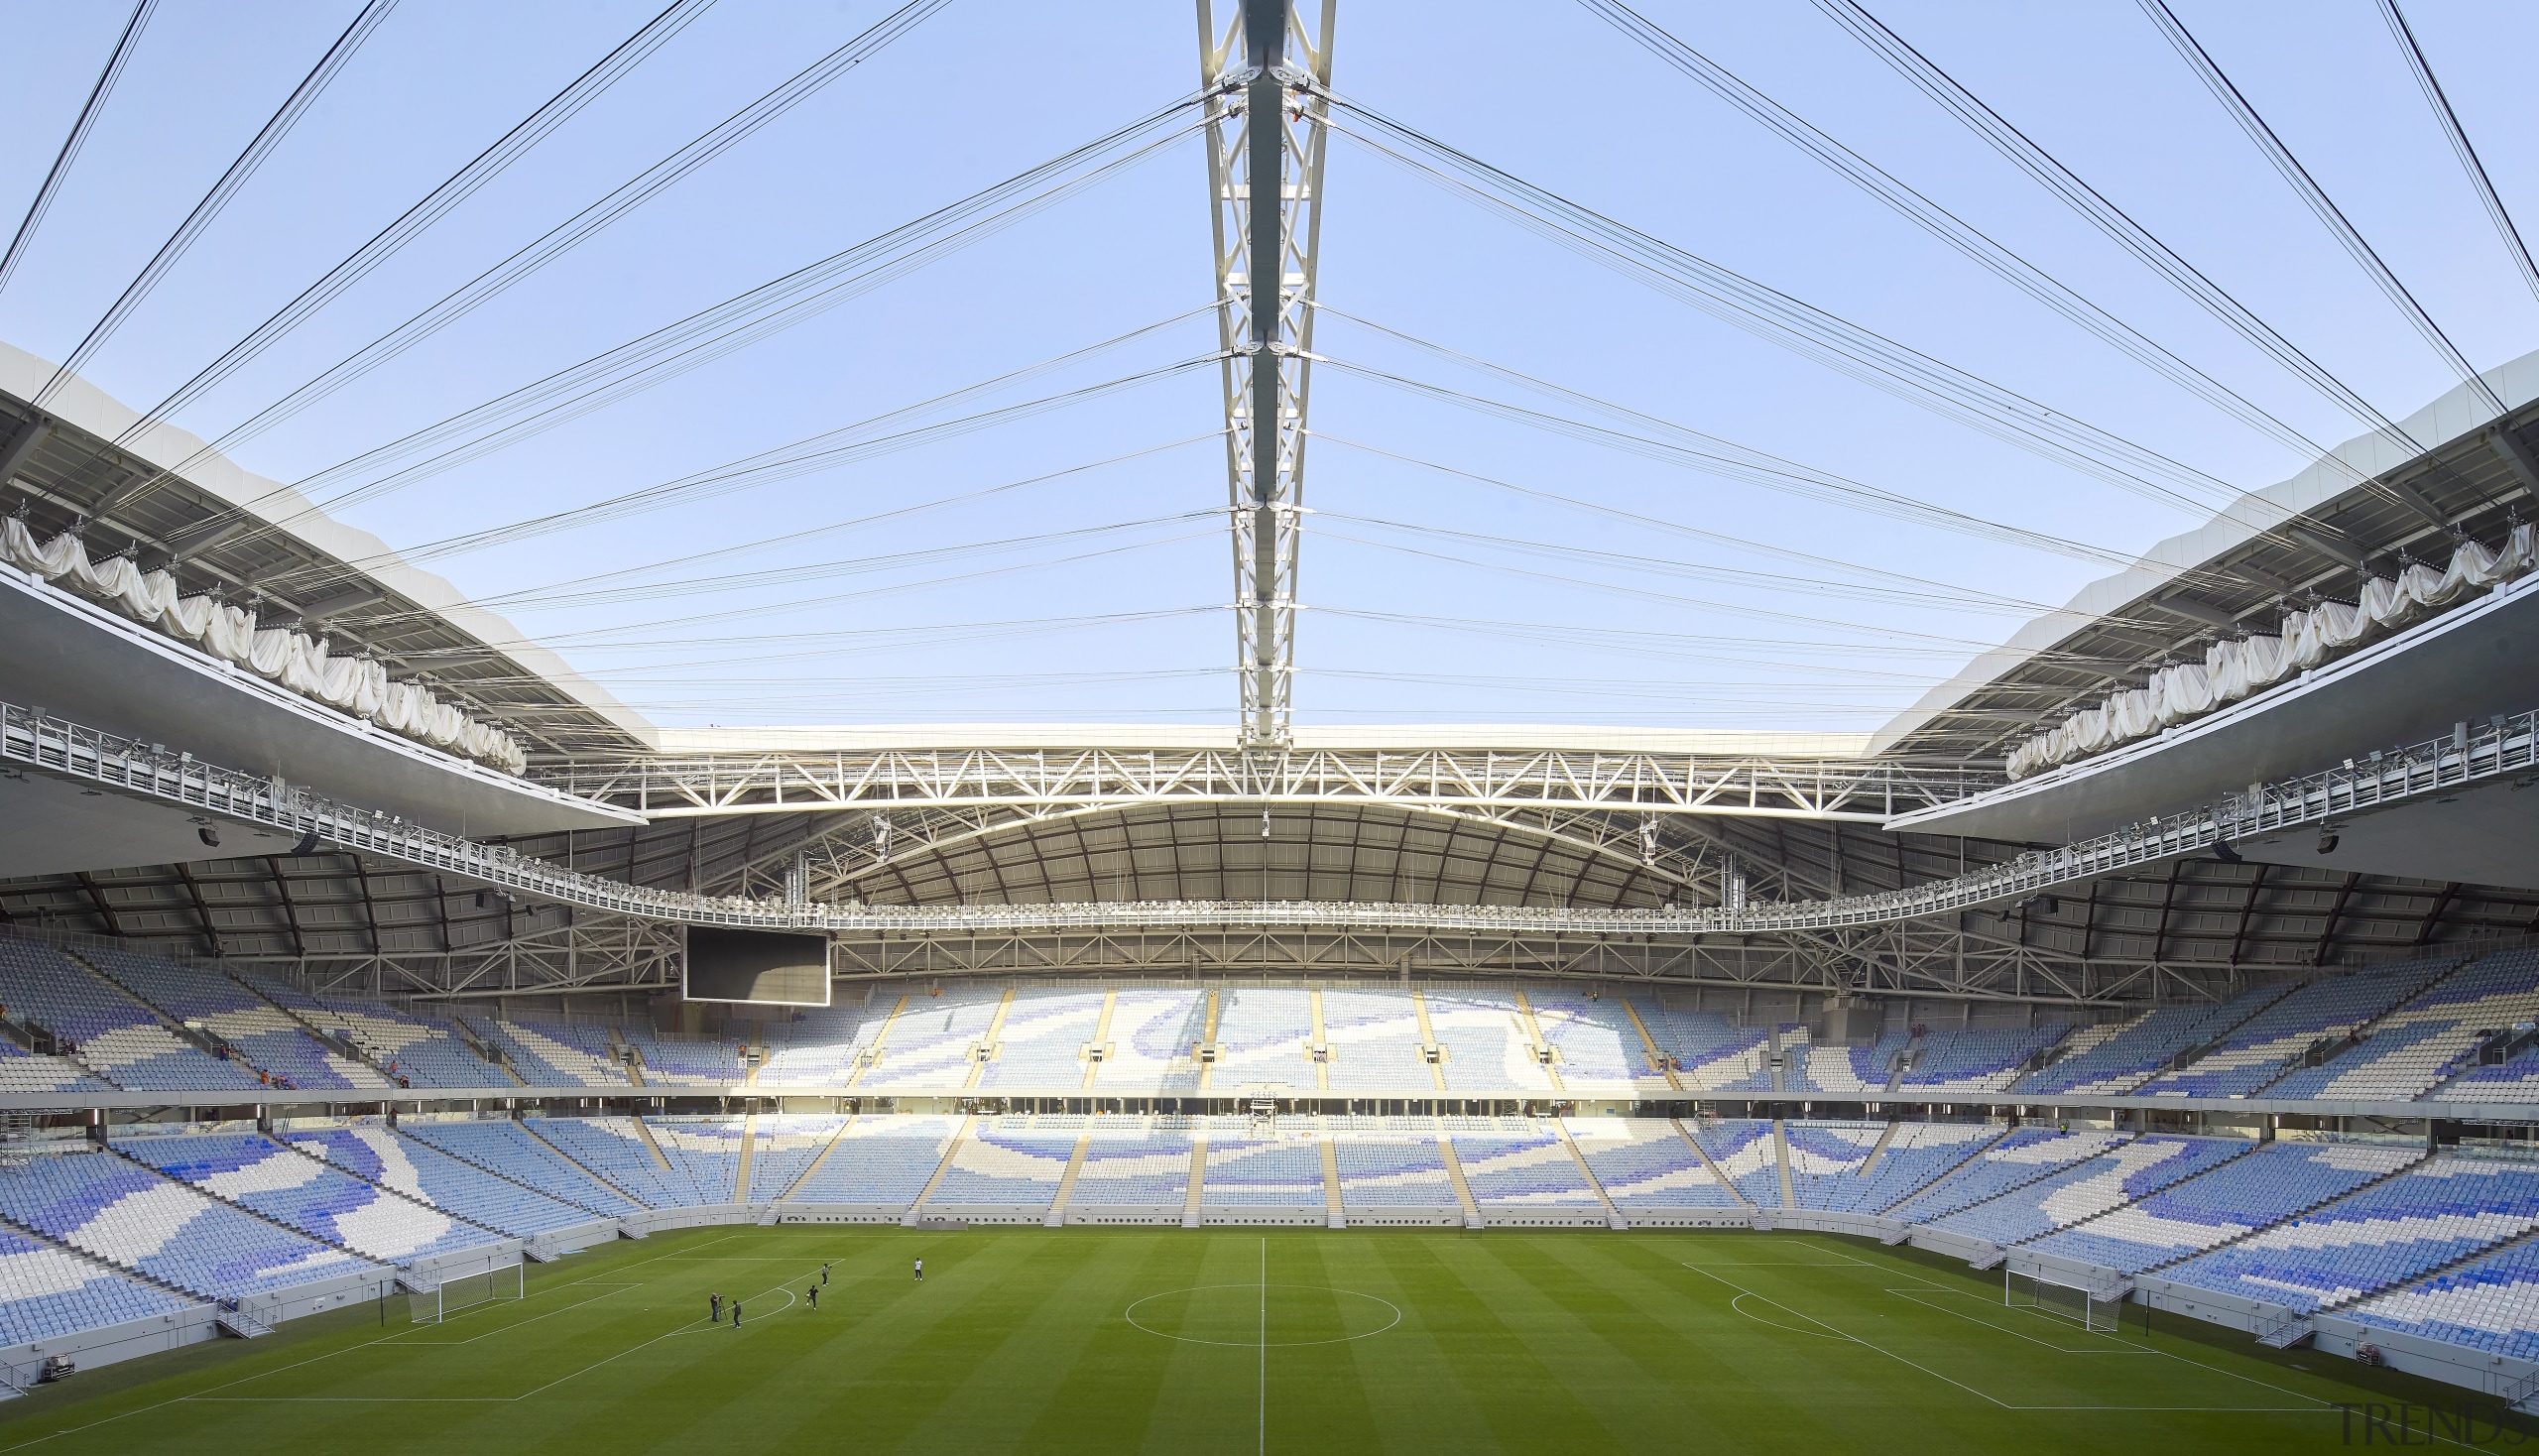 The operable roof has been designed in sympathy architecture, arena, soccer-specific stadium, sport venue, stadium, teal